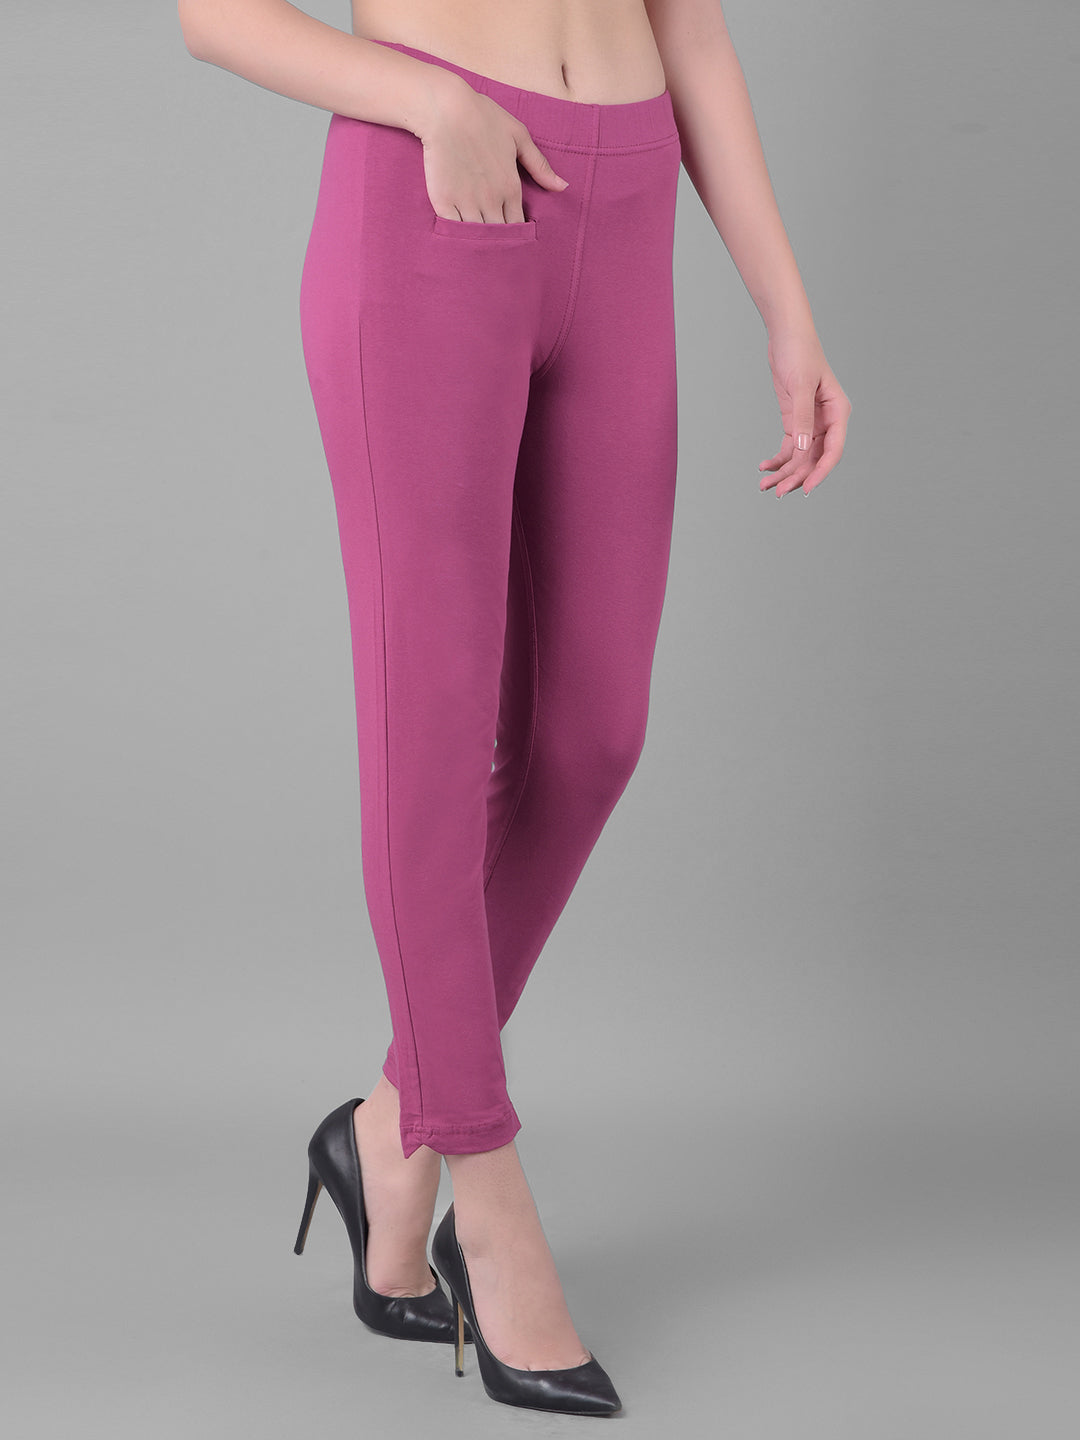 Buy Comfort Lady Kurti Pants (Leggings) With Pocket from Mangalam Impex